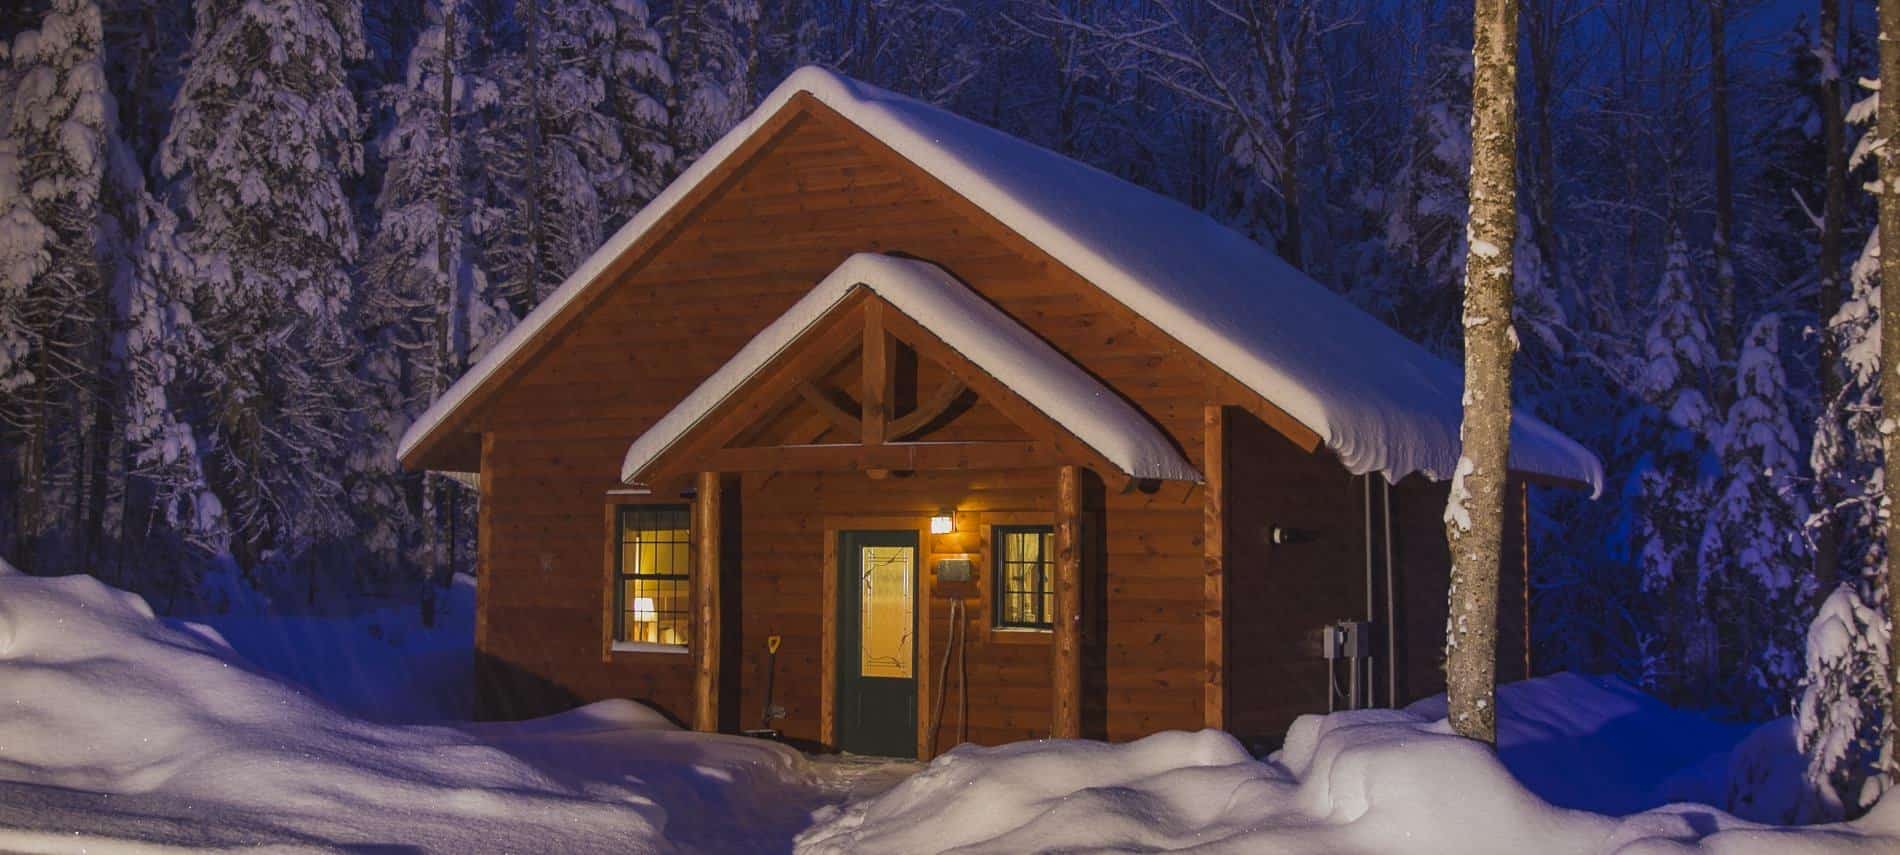 Log cabin with steep gable roof covered in snow at dusk surrounded by snow-covered trees and ground